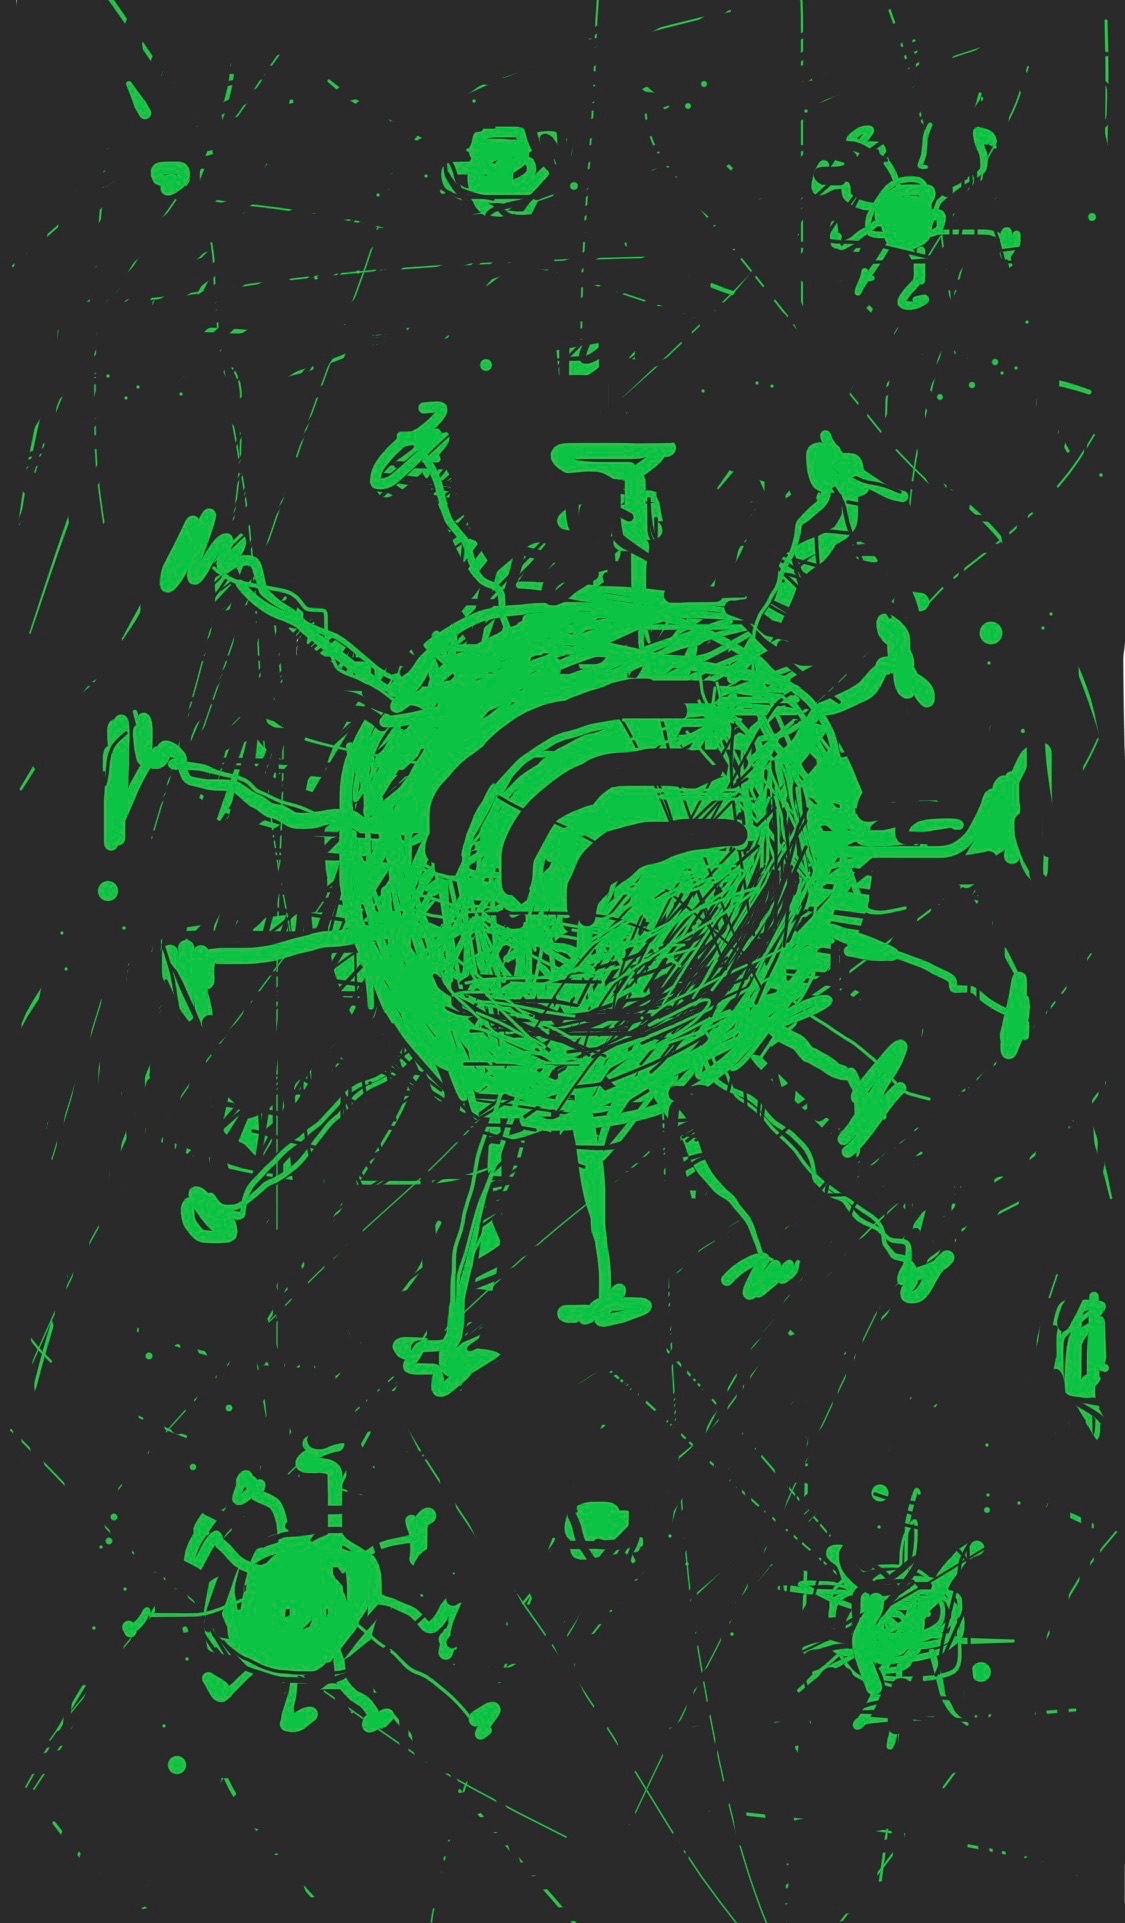 The Spotify logo, represented as a COVID virus.